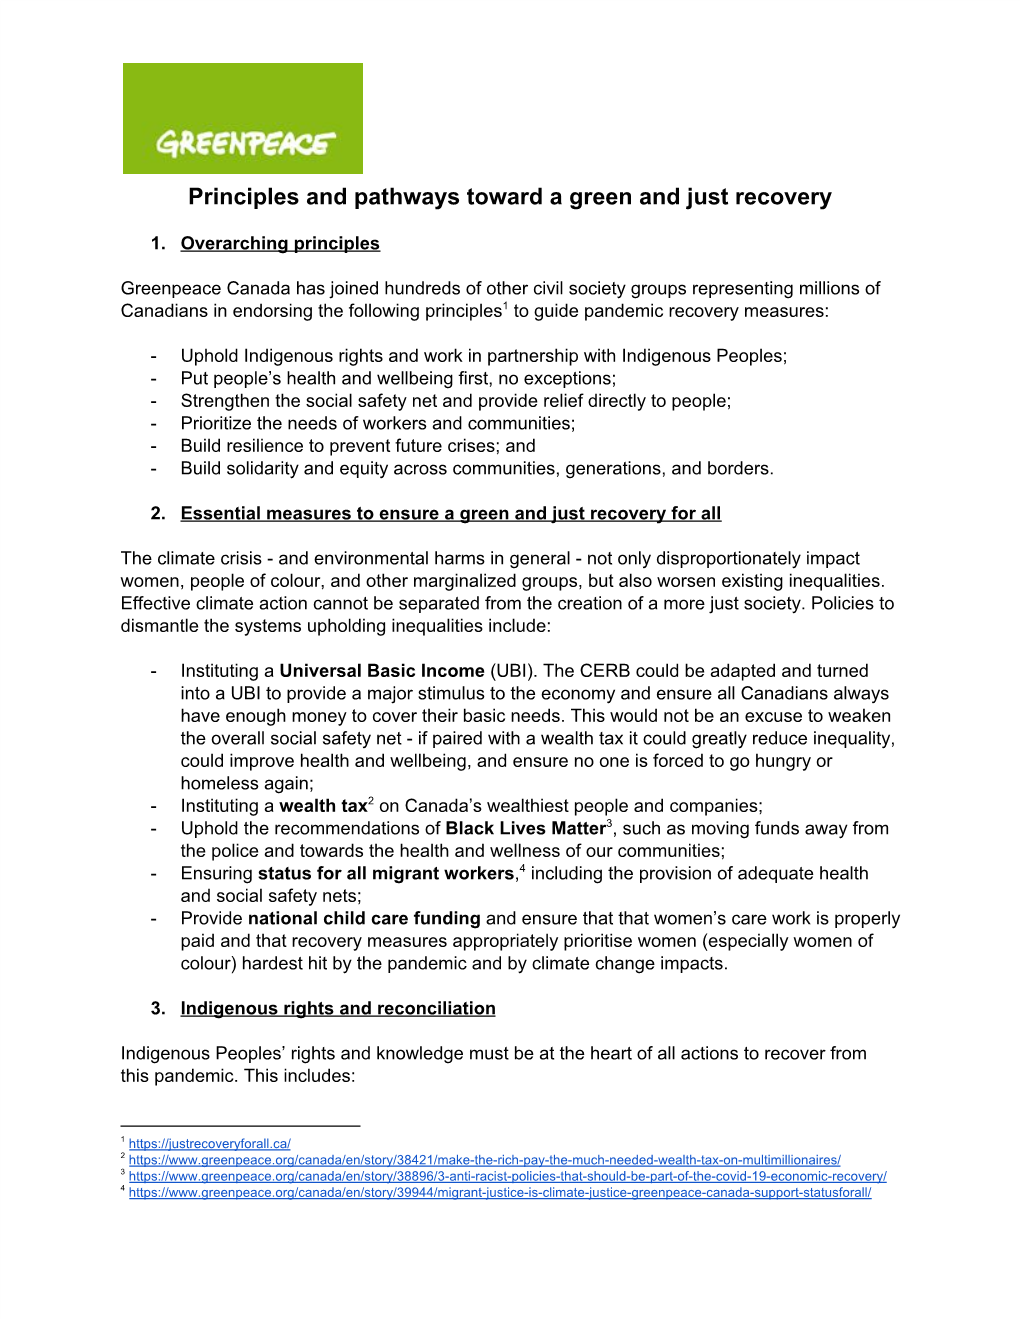 Principles and Pathways Toward a Green and Just Recovery